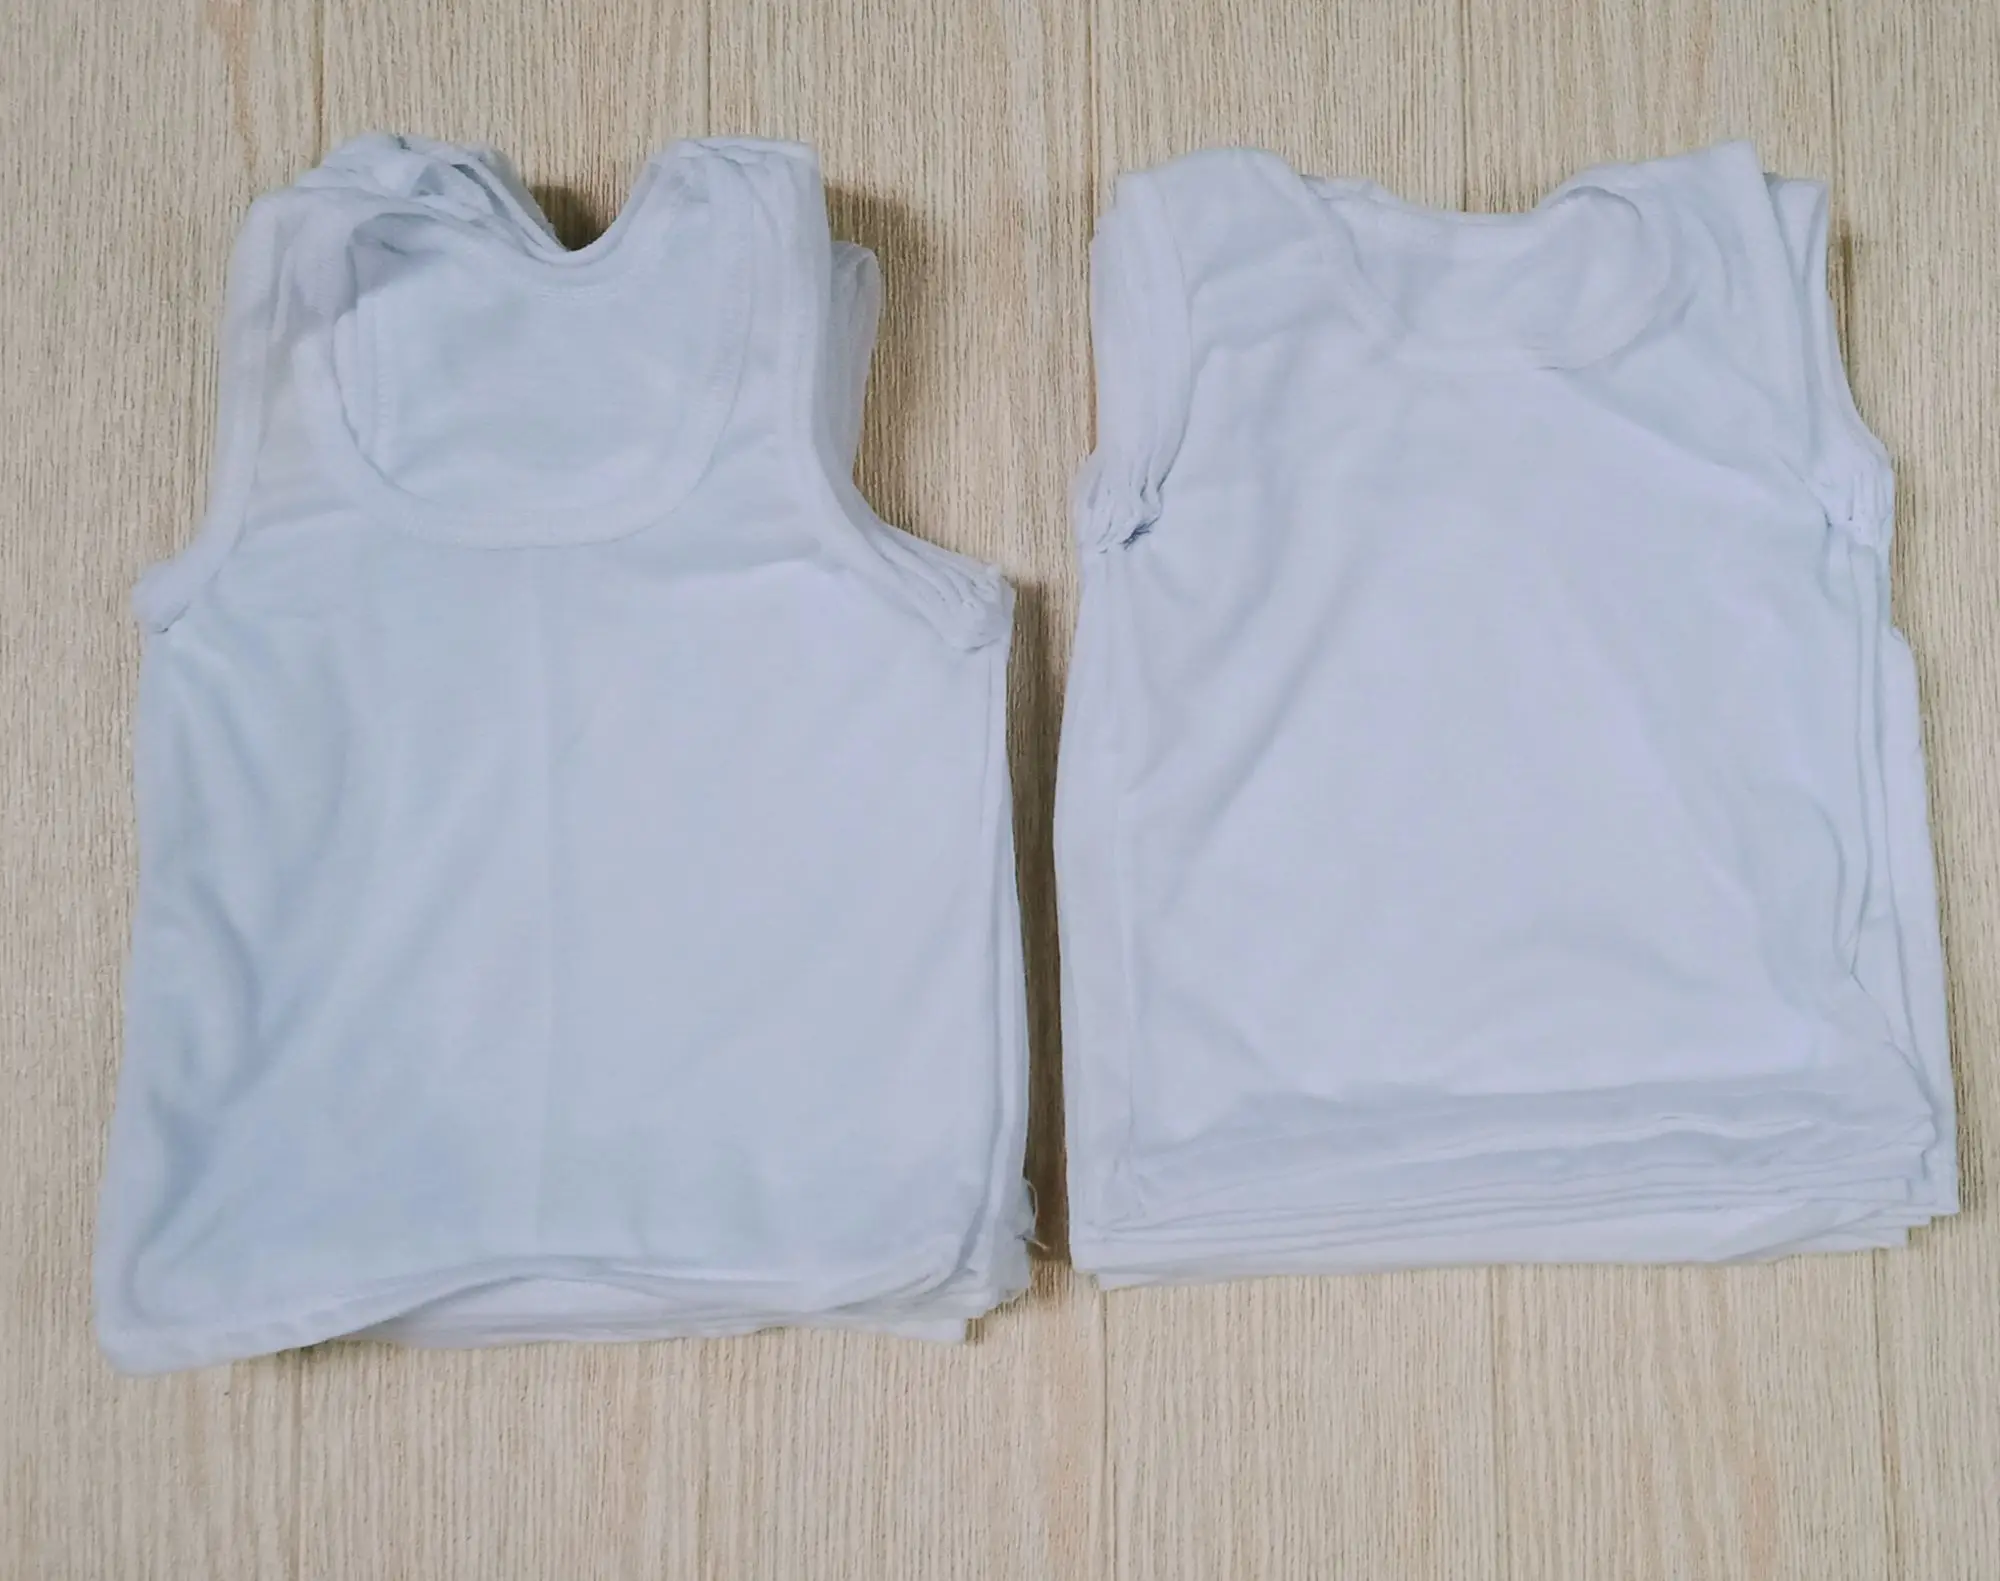 12pcs Sando For Baby/ordinary/6months Below/all white